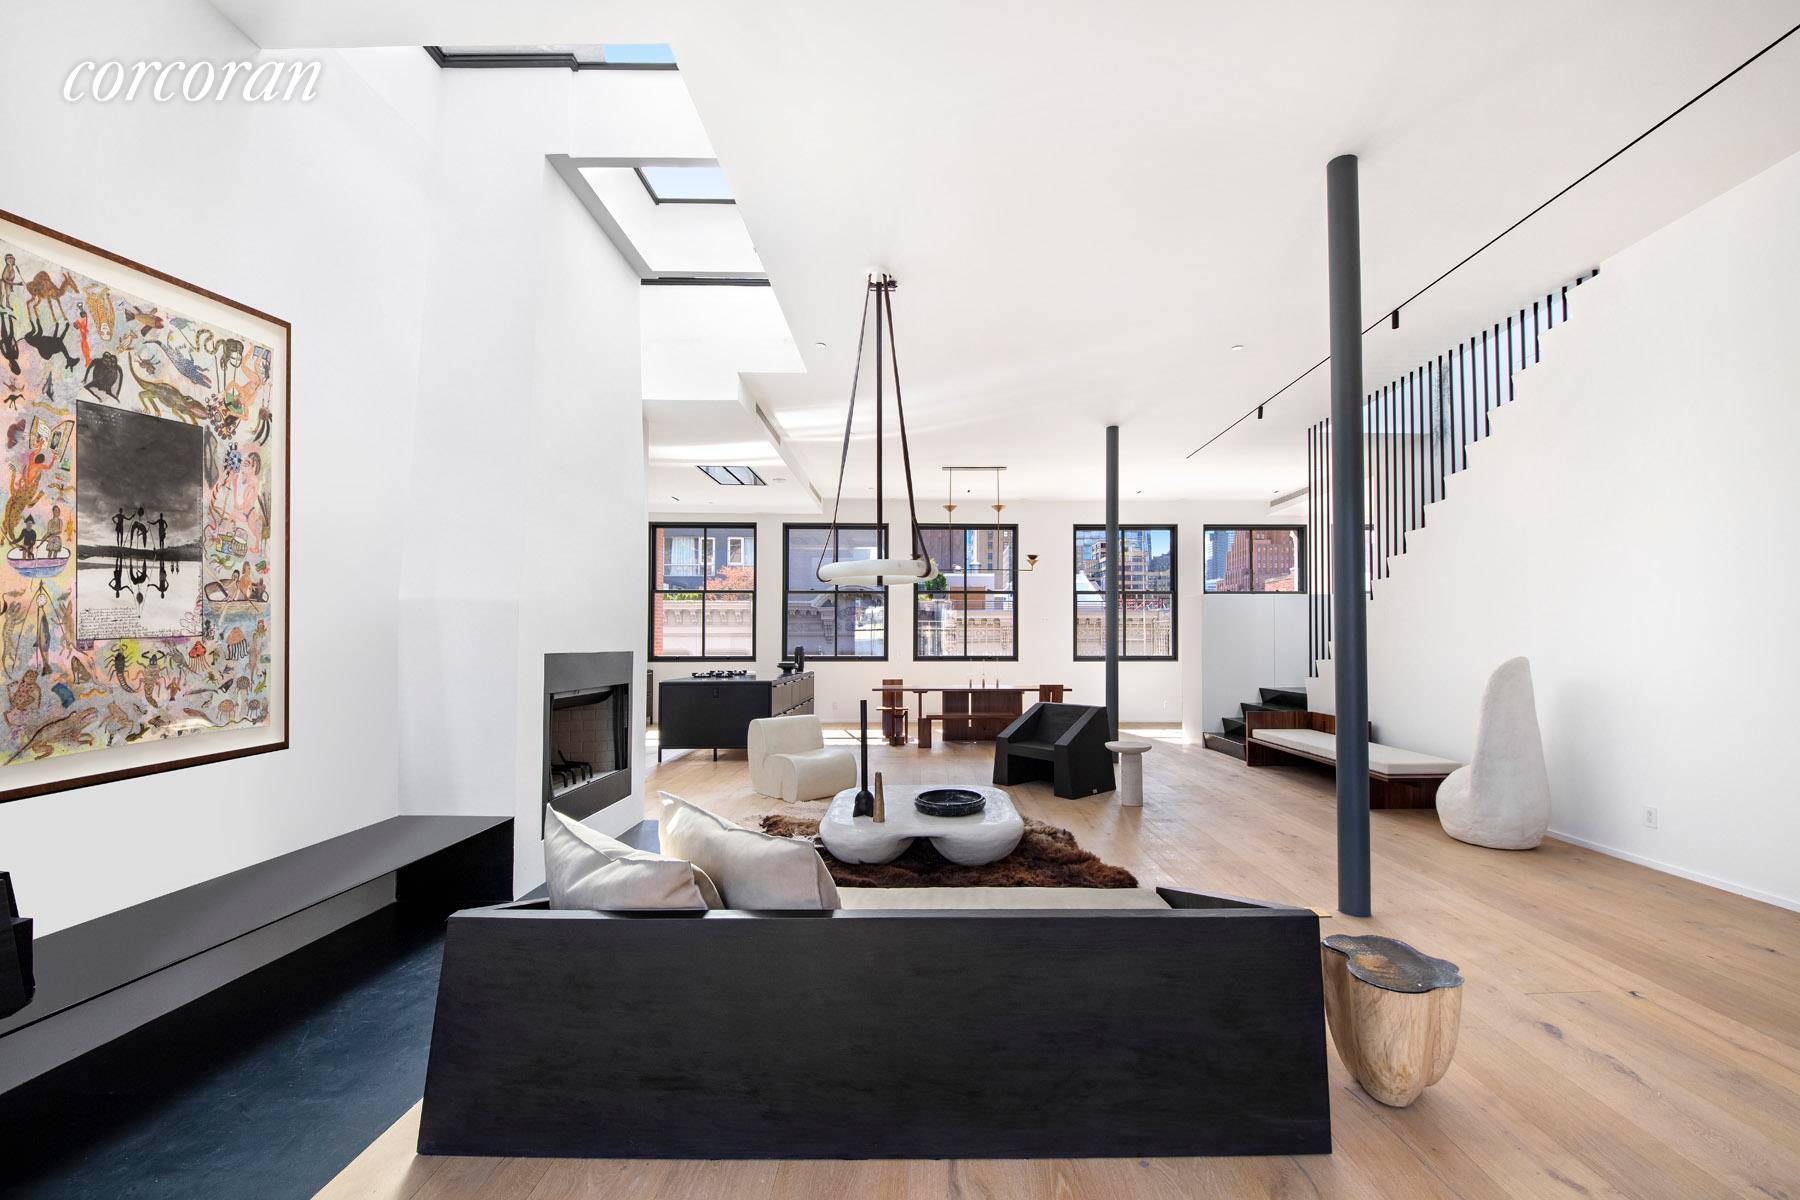 Gut renovated, Sun Blasted and Spectacular, four bedroom, three and a half bathroom penthouse loft, with 4 exposures, epitomizes chic TriBeCa living with outstanding modern design and an extraordinary 3000SF ...